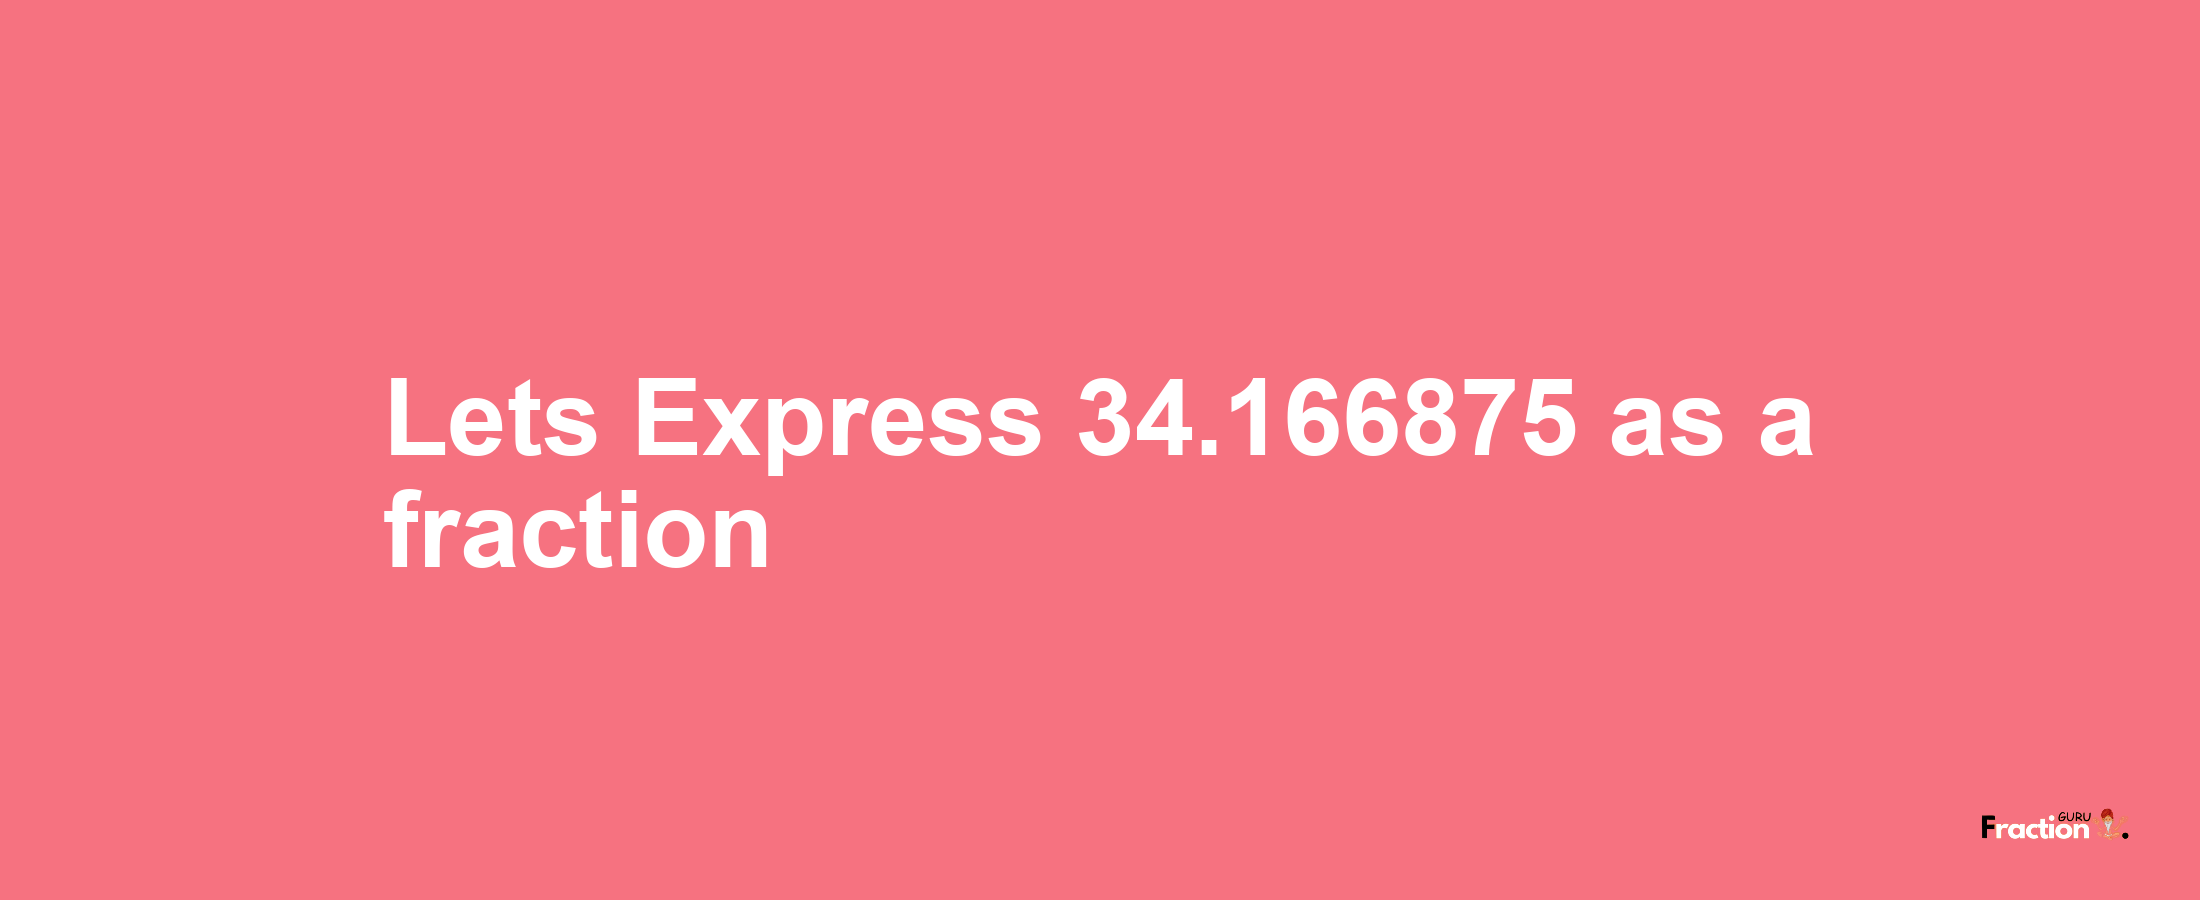 Lets Express 34.166875 as afraction